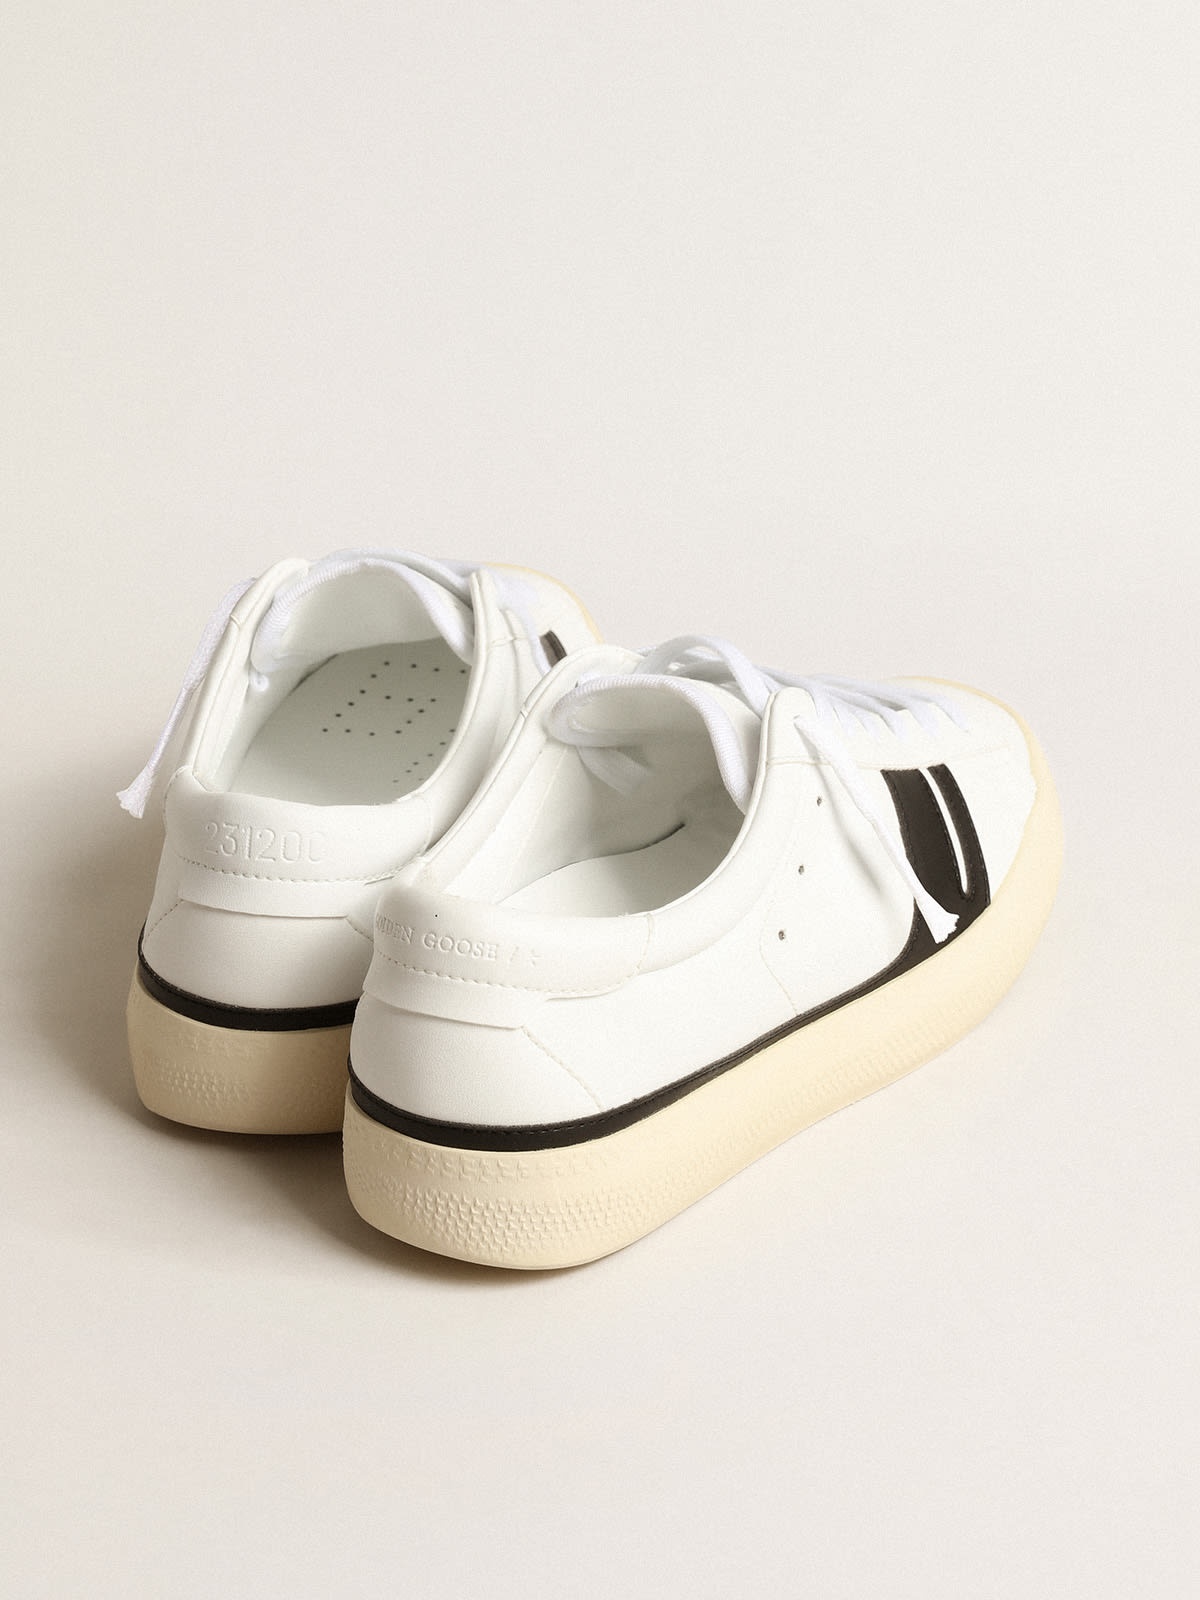 Yatay Model 1B sustainable sneakers with white bio-based upper and black Y - 5